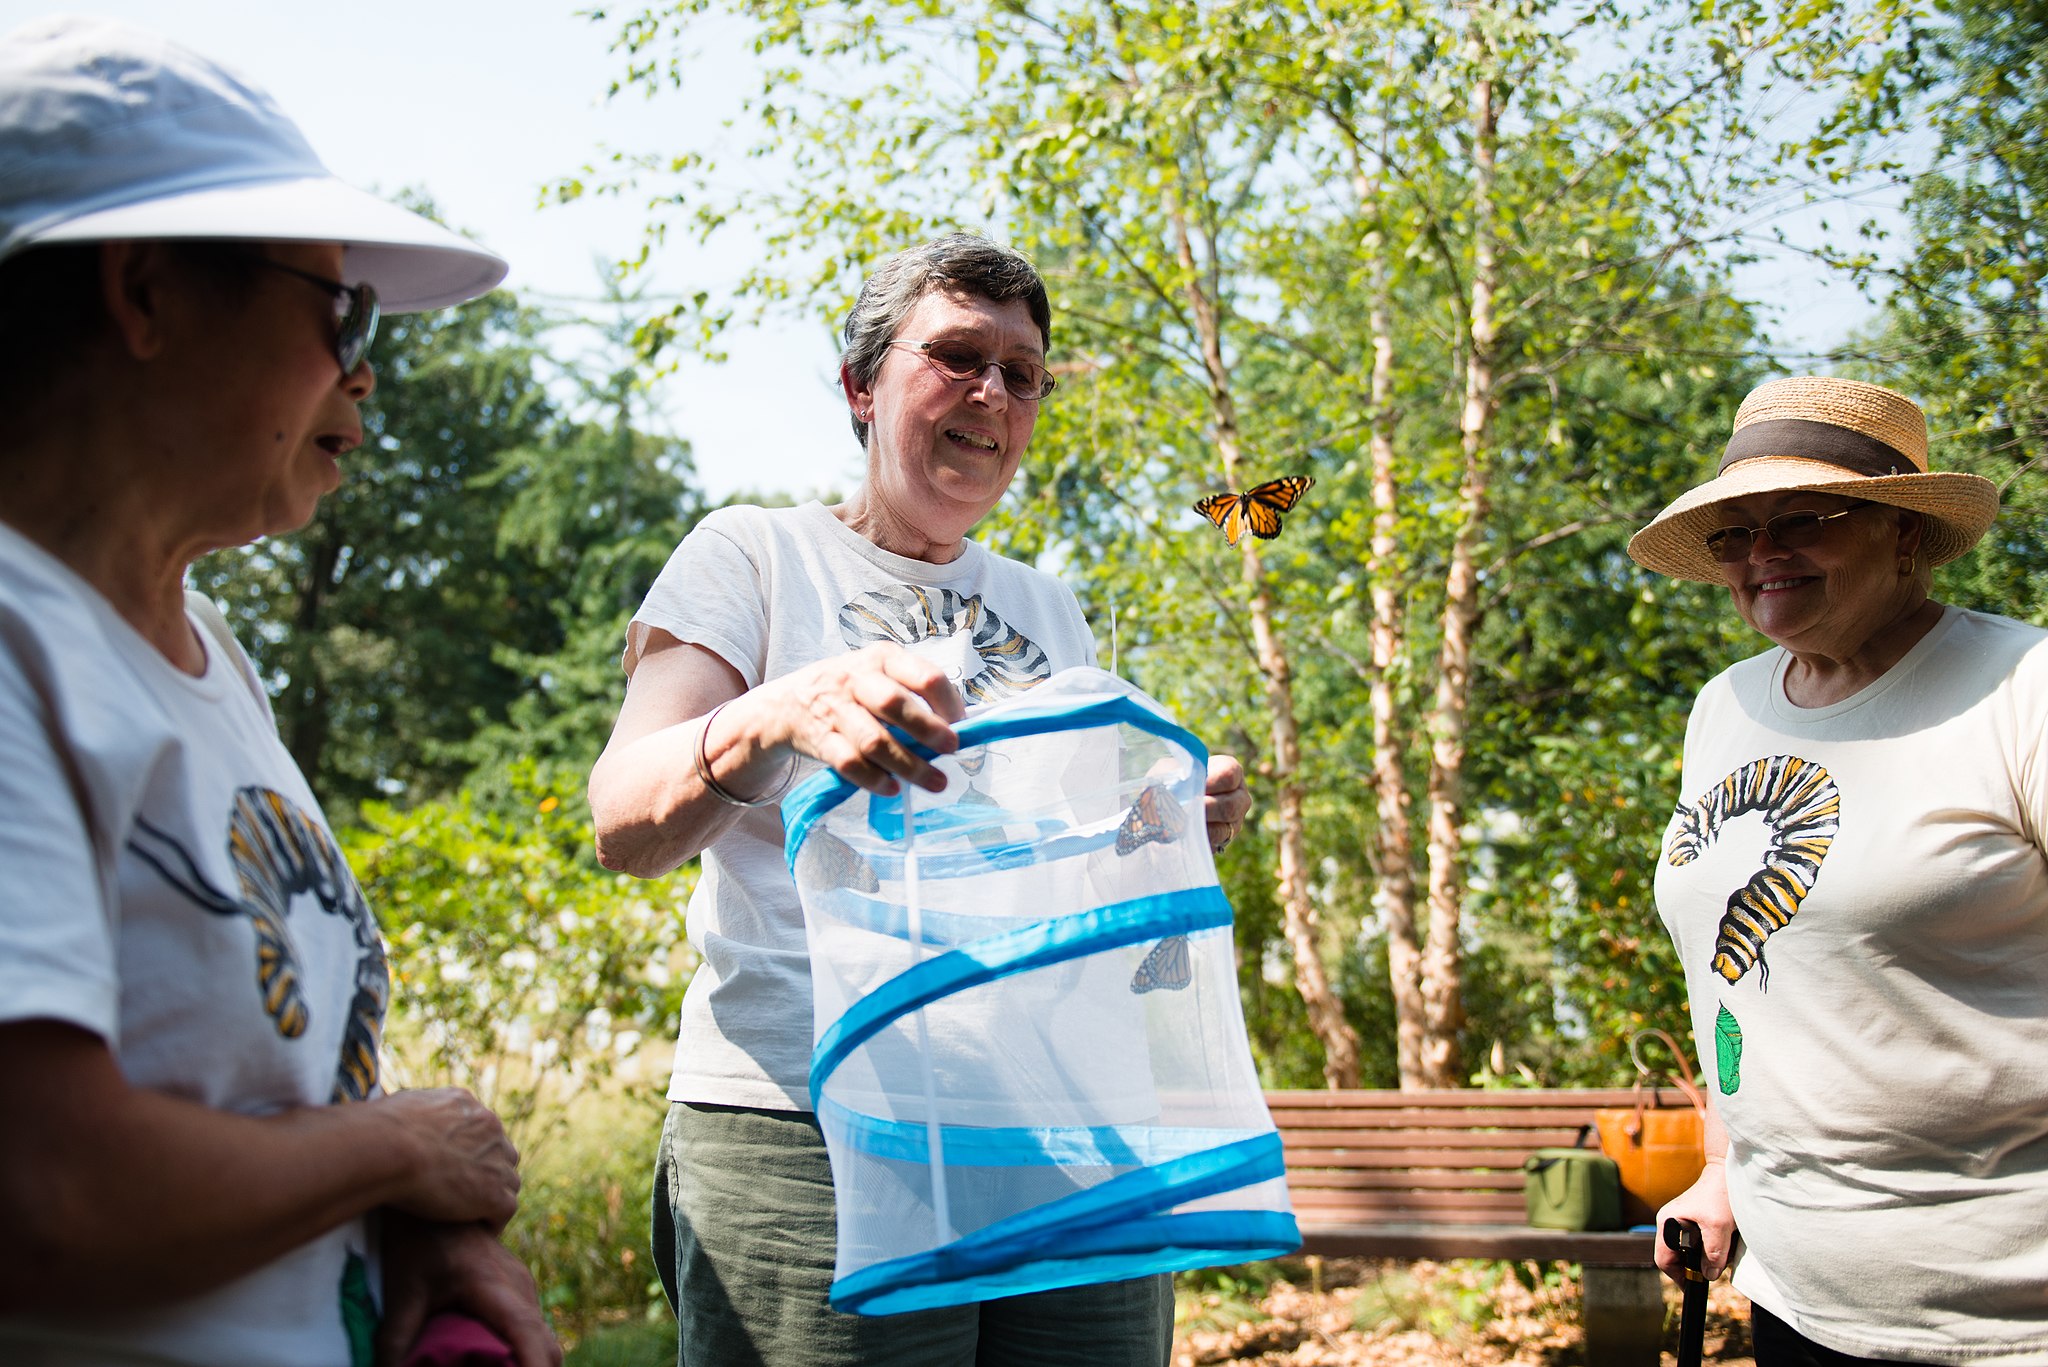 A monarch butterfly released in Arlington National Cemetery by volunteers with Monarch Teacher Network, Sept. 1, 2015, in Arlington, VA